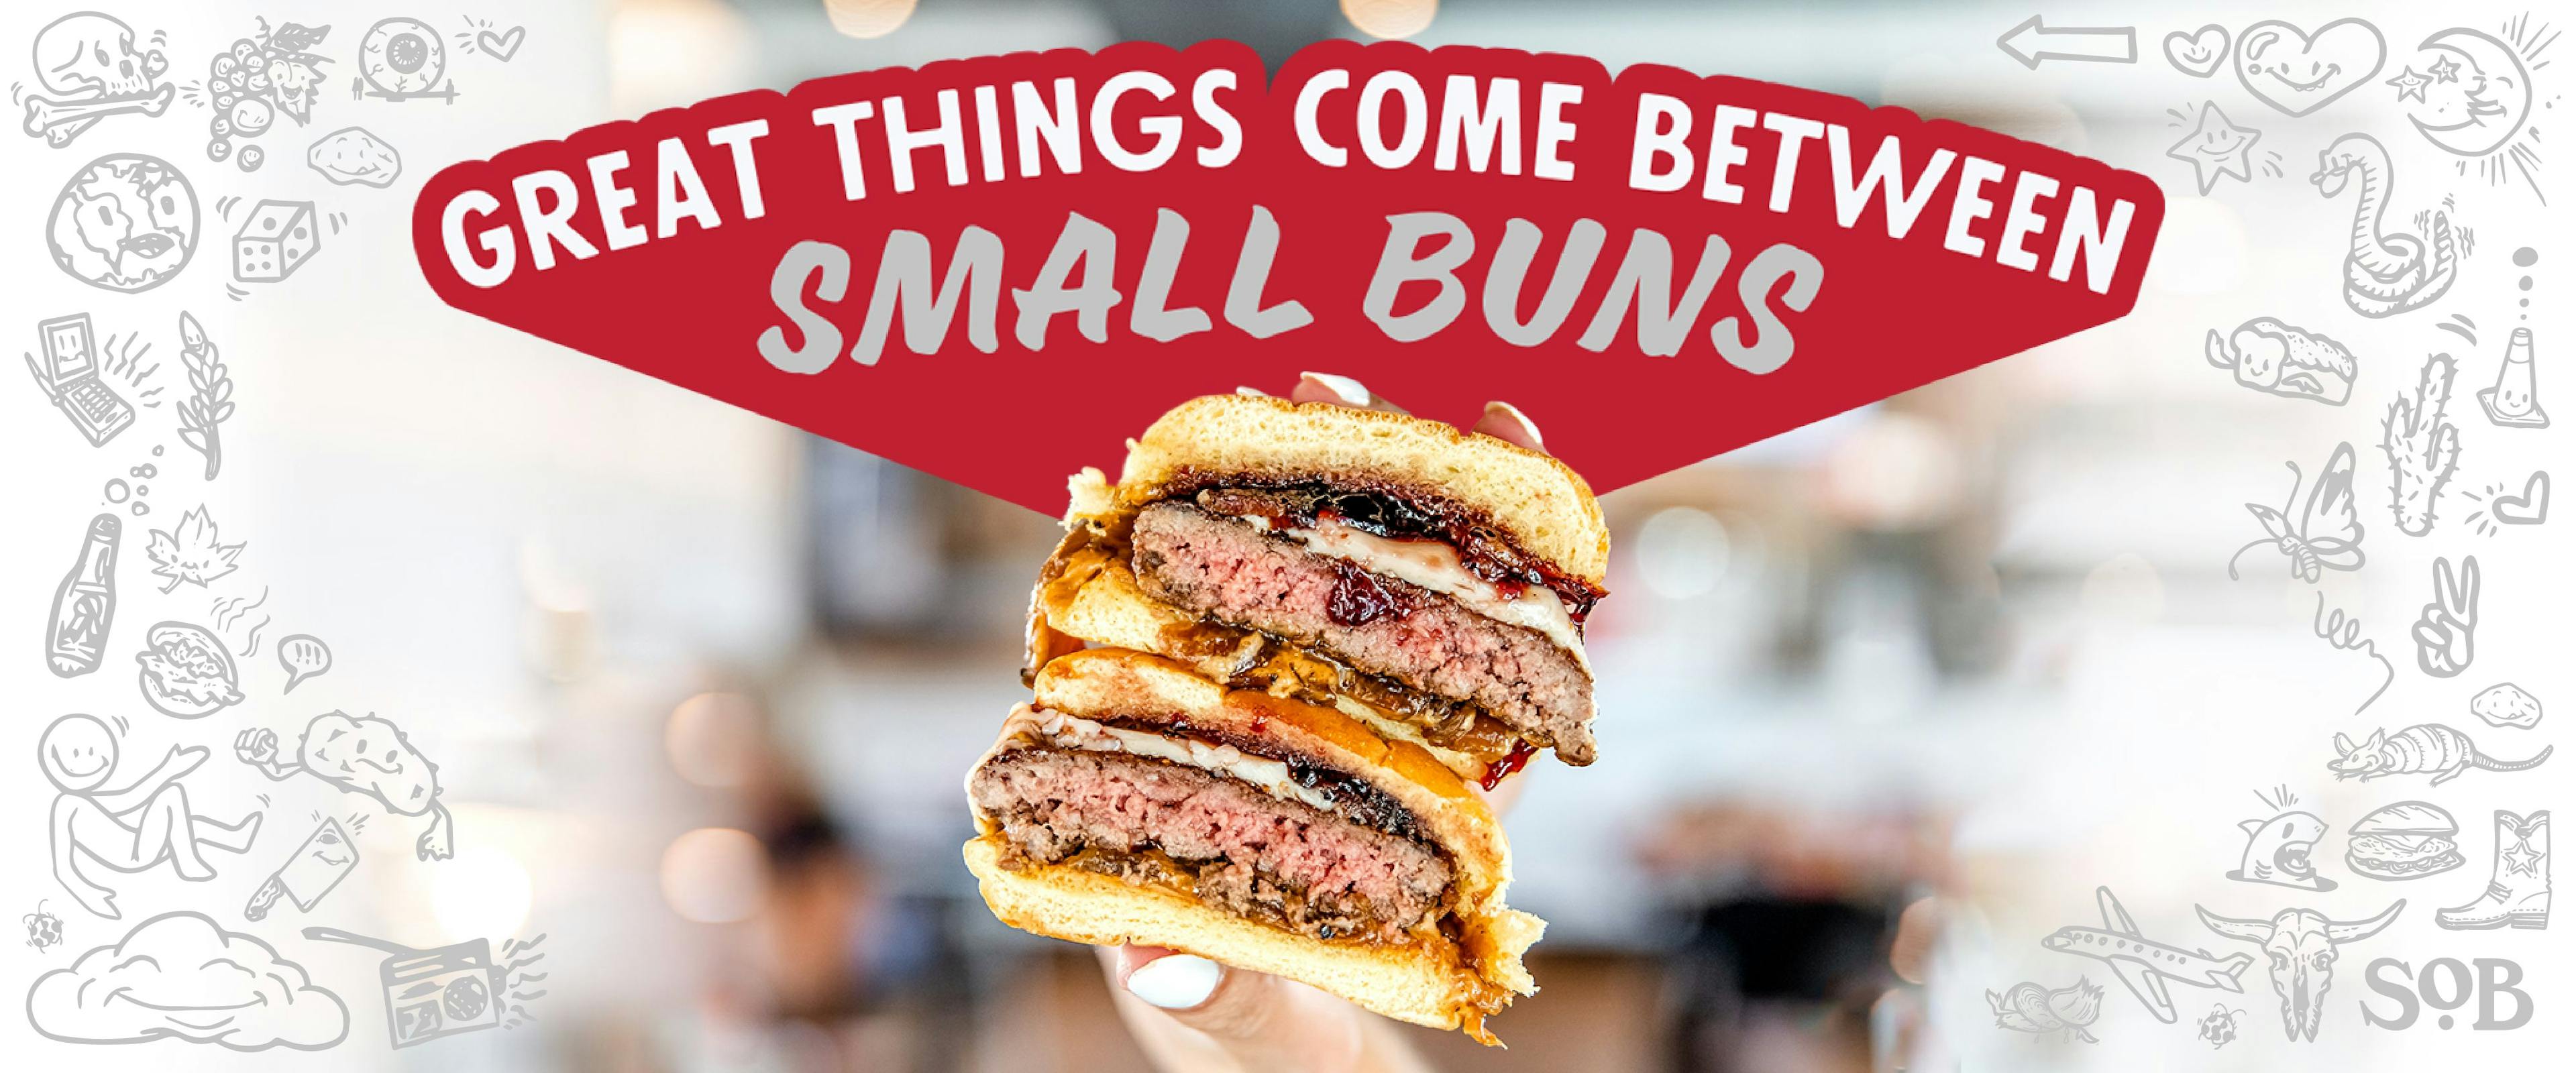 Great Things Come Between Small Buns